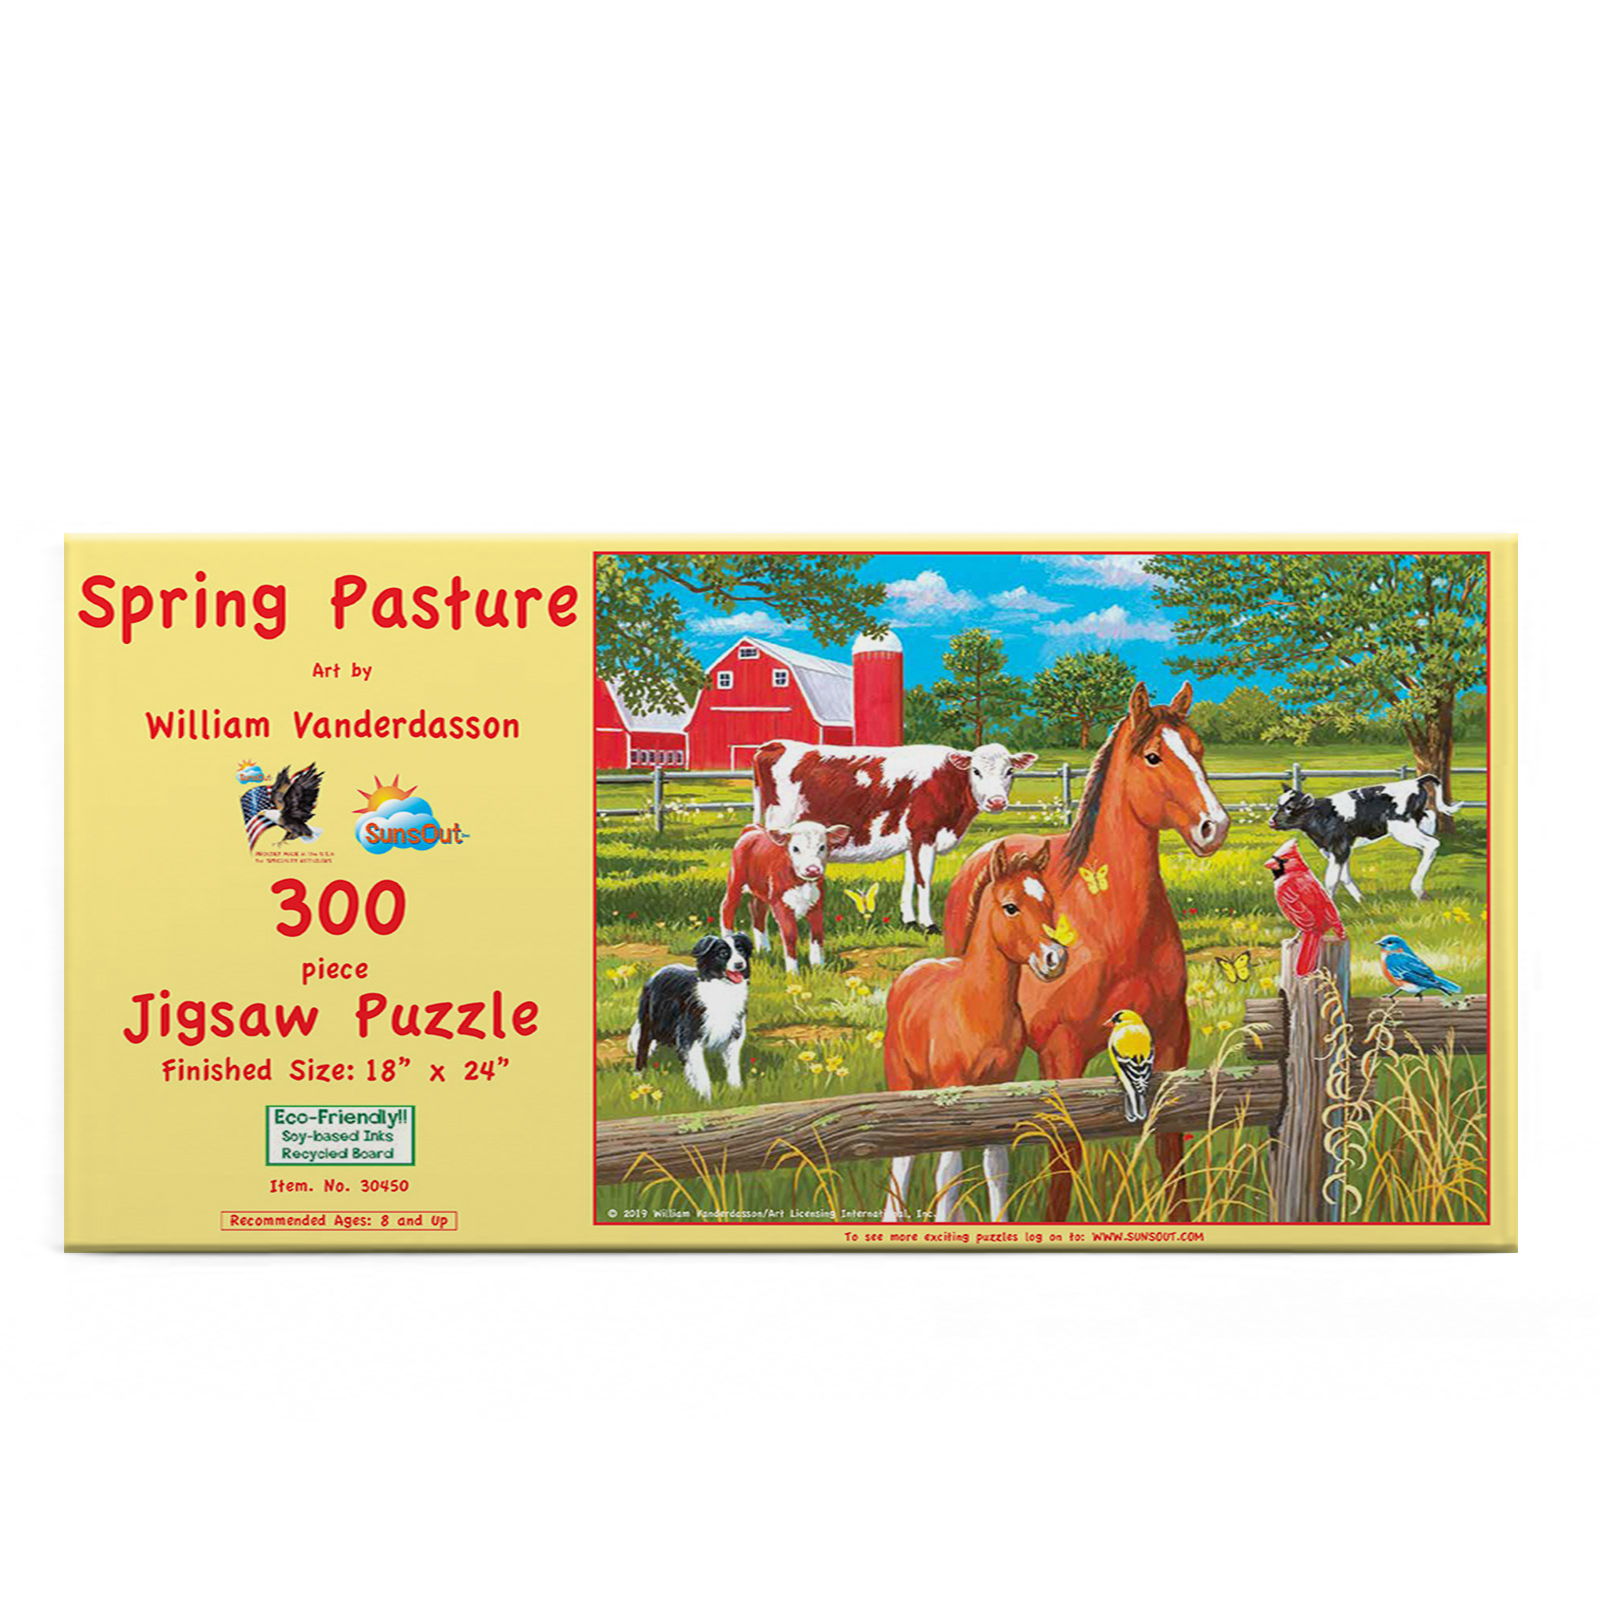 SUNSOUT INC - Spring Pasture - 300 pc Jigsaw Puzzle by Artist: William Vanderdasson - Finished Size 18" x 24" - MPN# 30450 - image 3 of 5